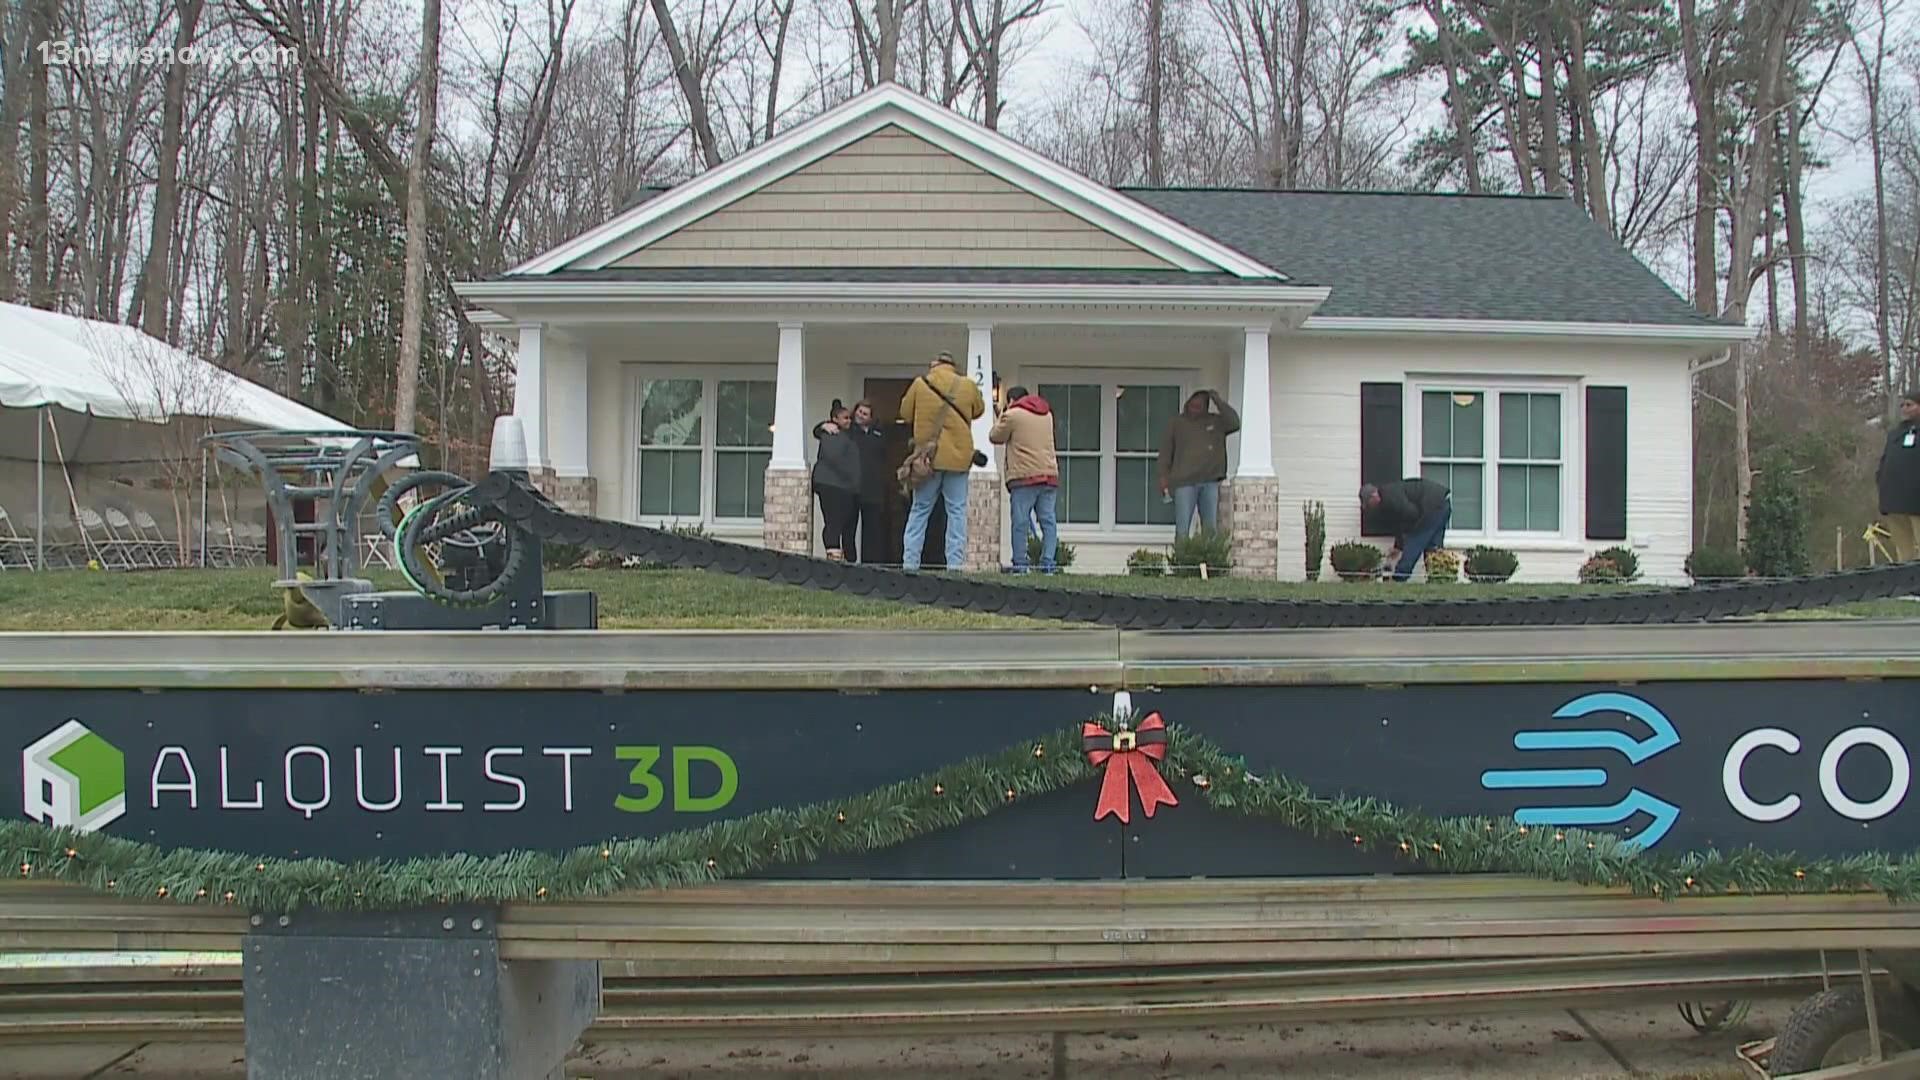 Officials said it's the first home of its kind on the East Coast.